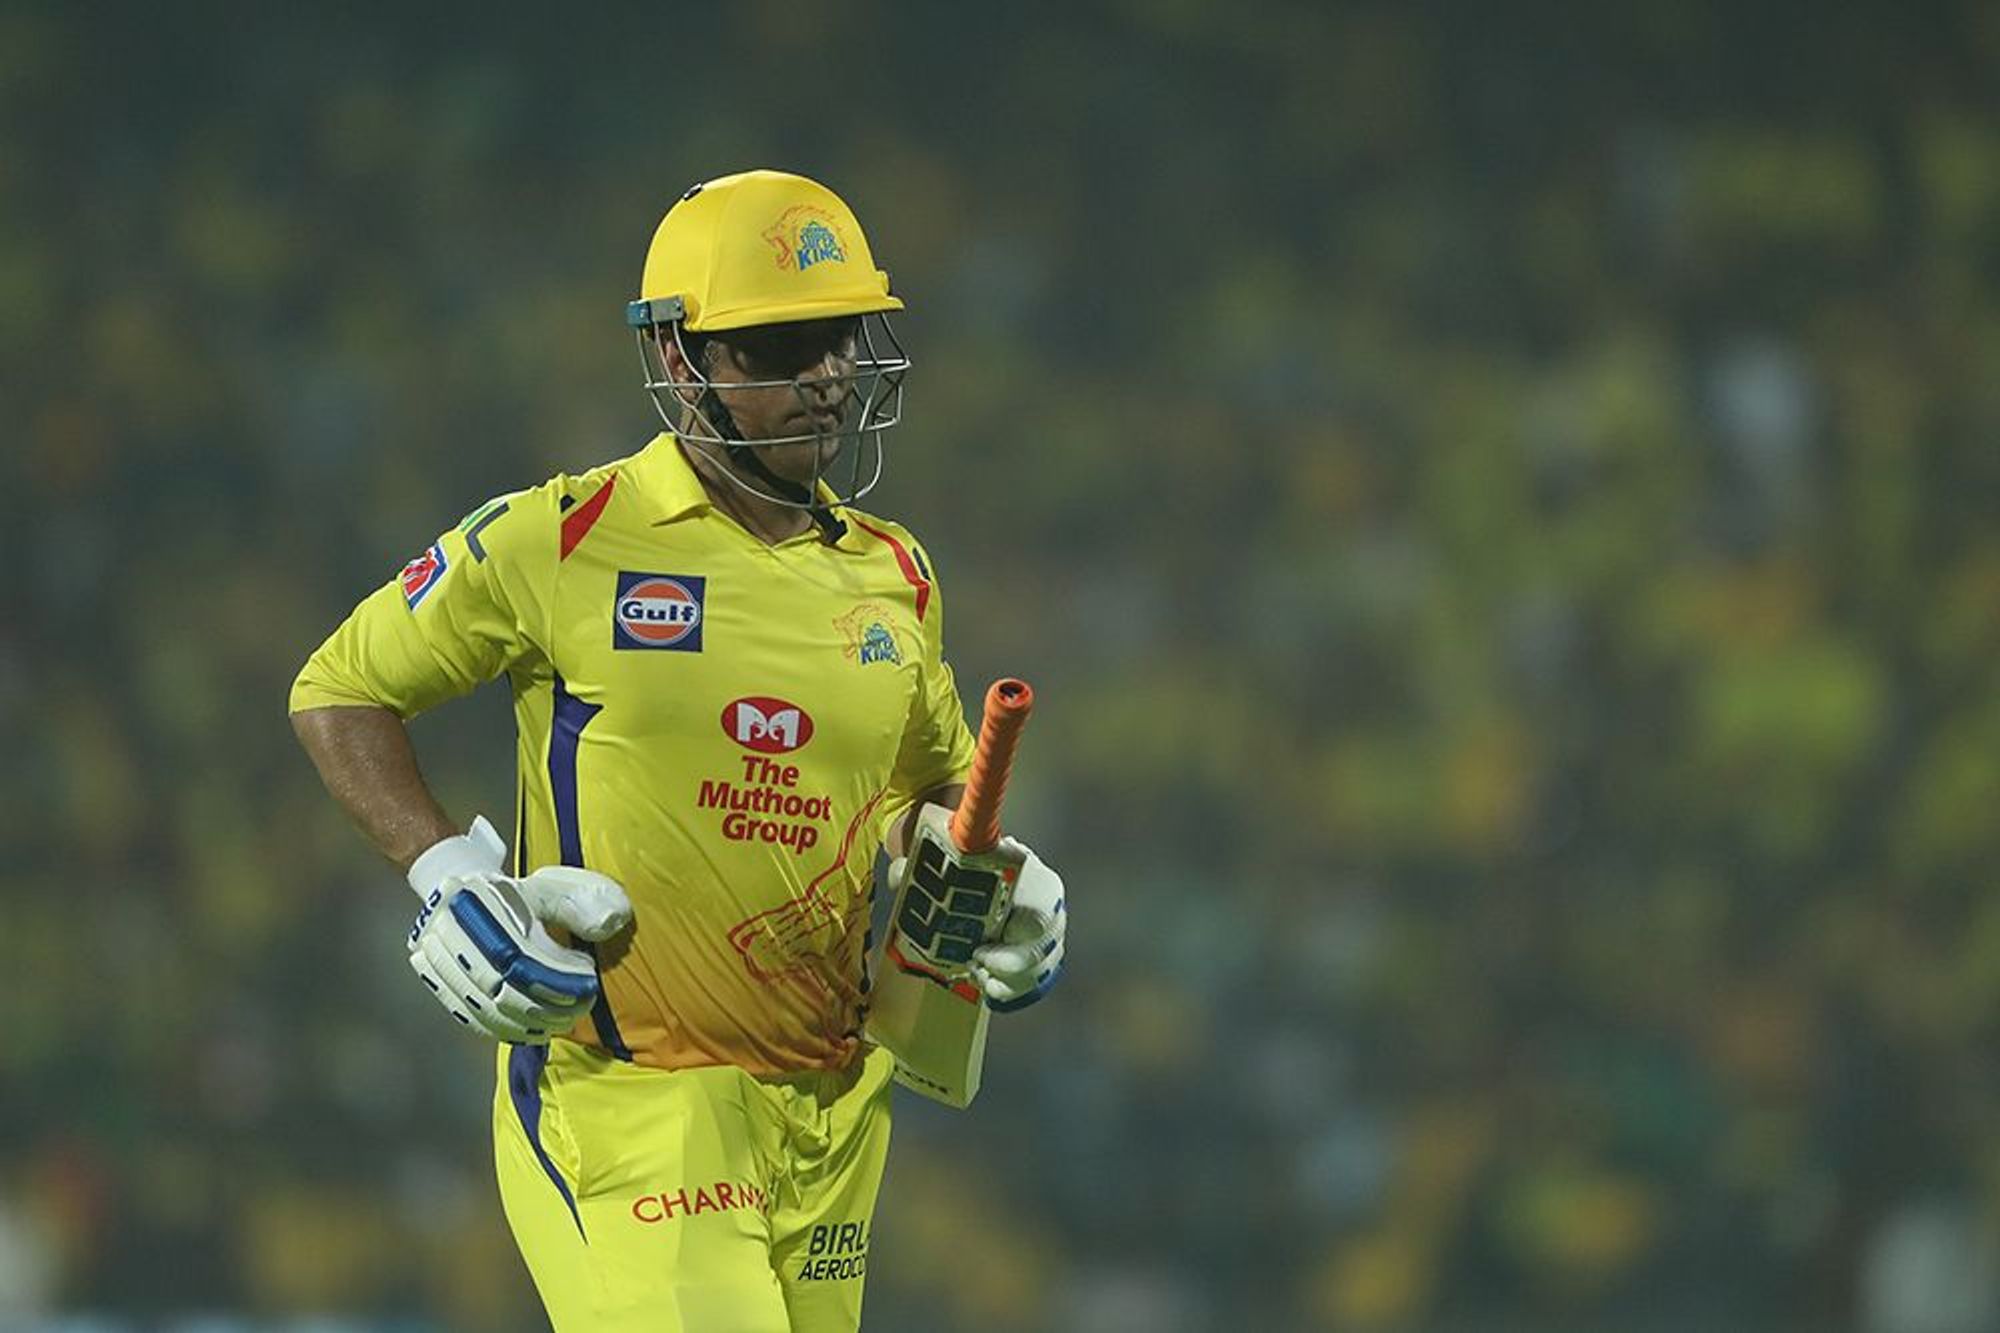 IPL 2020 | Krishnamachari Srikkanth rips Dhoni to shreds for ‘ridiculous’ comment about youngsters